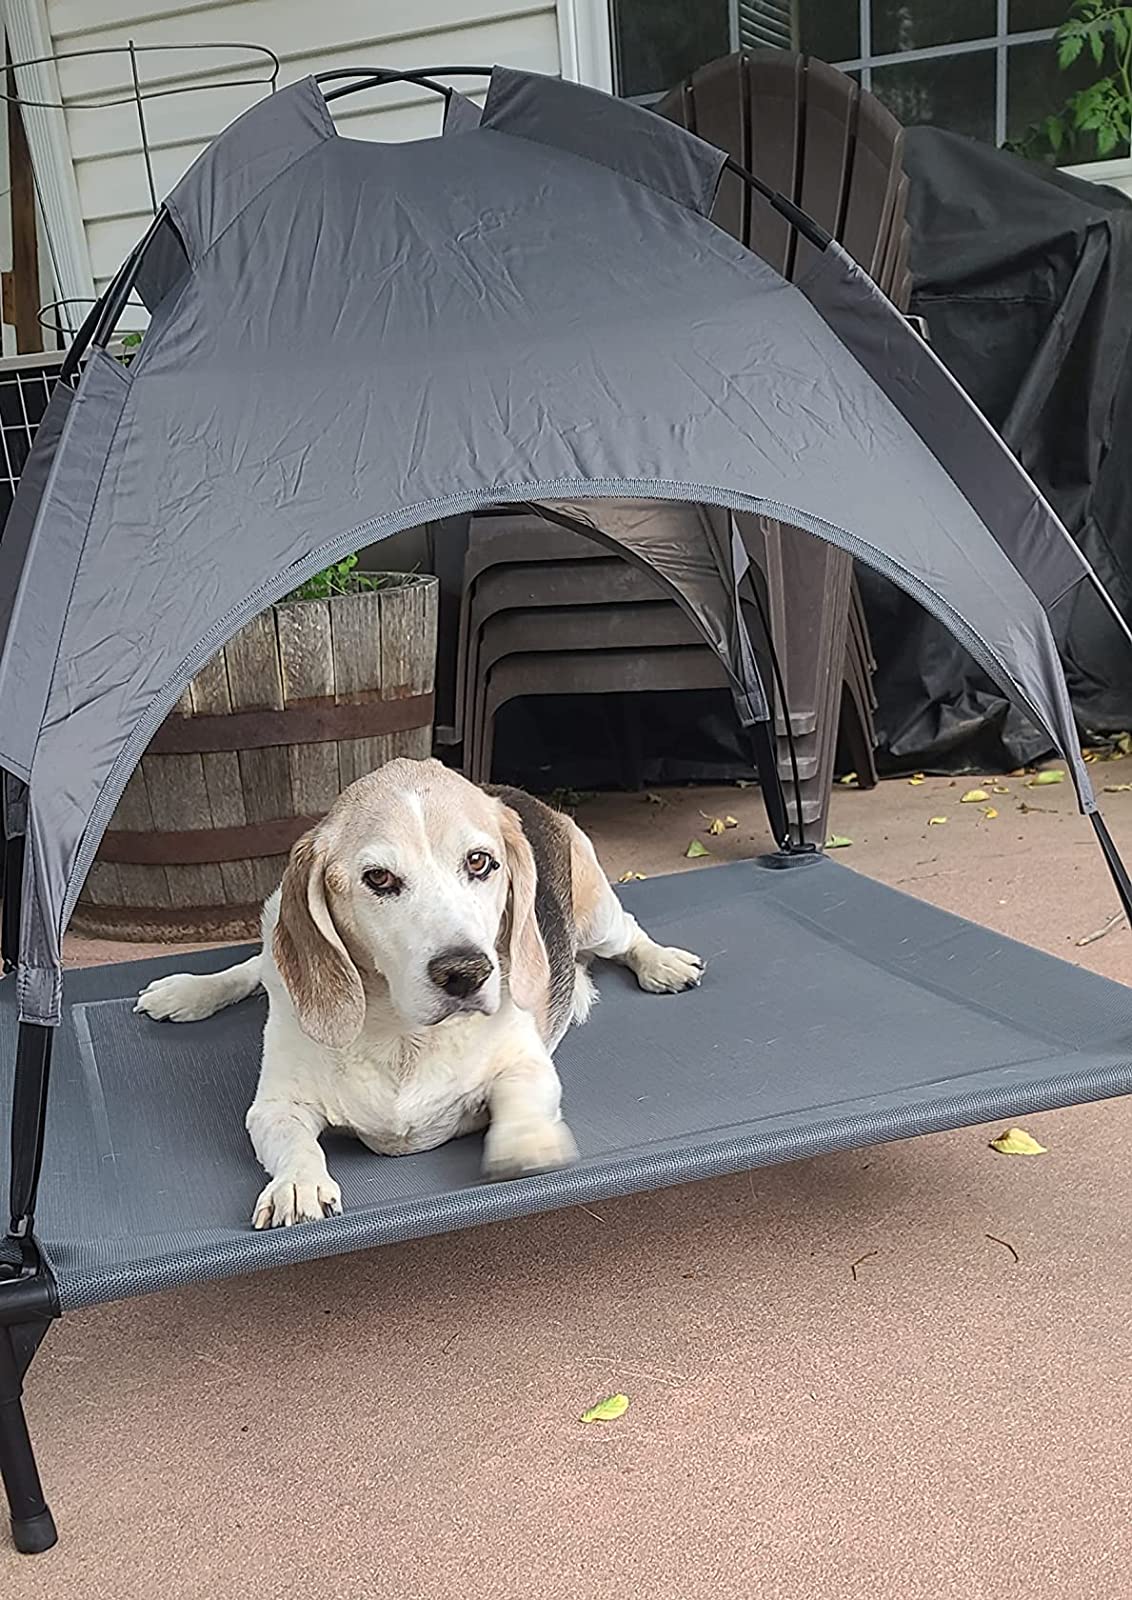 Perfect for a chunky beagle